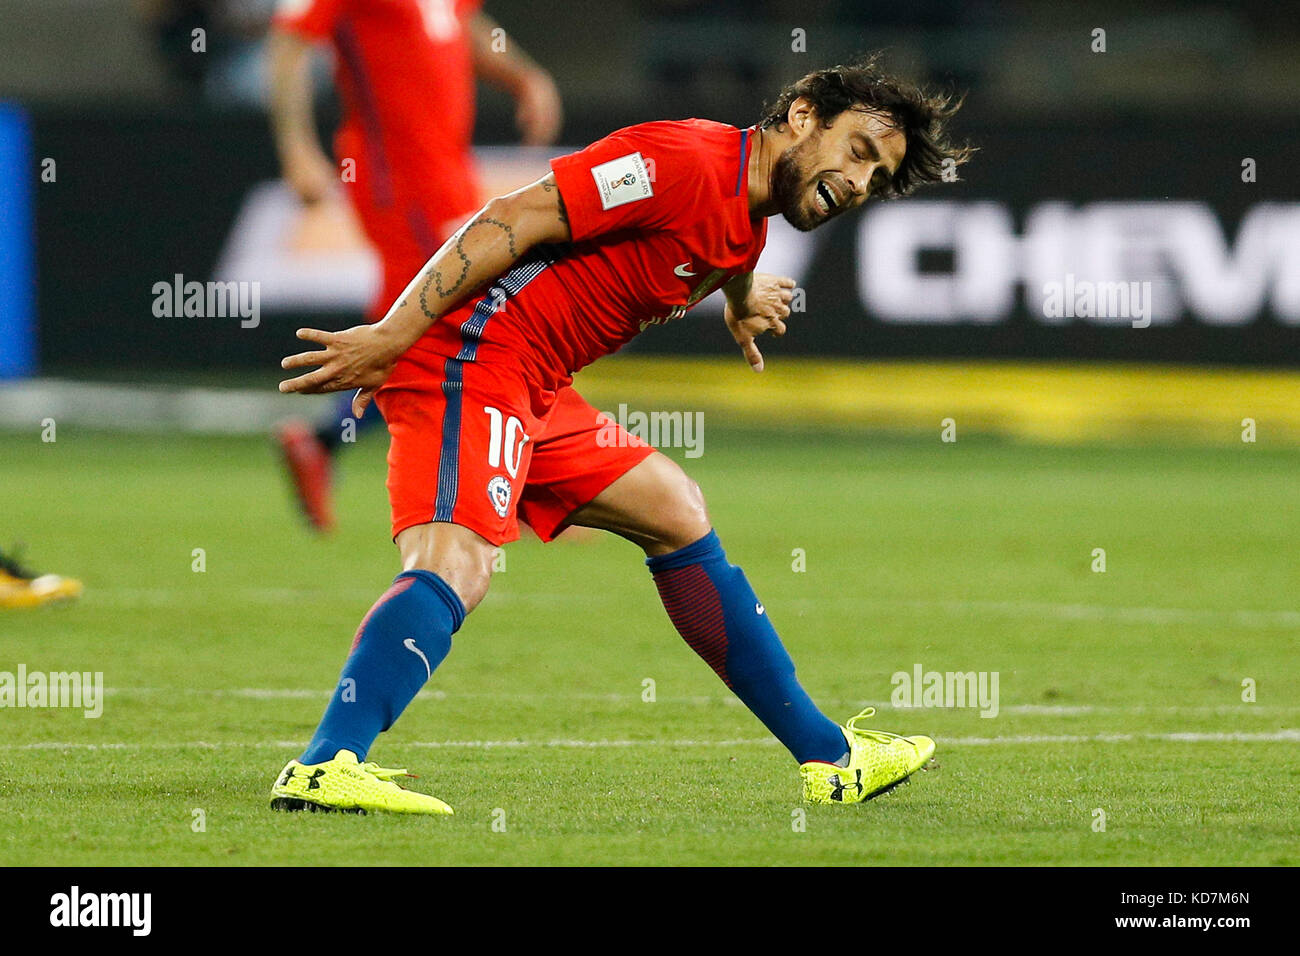 Sao Paulo, Brazil. 10th Oct, 2017. Jorge Valdivia of Chile during a match between Brazil and Chile valid for the last round of the World Cup Qualifiers Russia 2018, held at Allianz Parque in the neighborhood of Barra Funda, west of the capital. Credit: Foto Arena LTDA/Alamy Live News Stock Photo